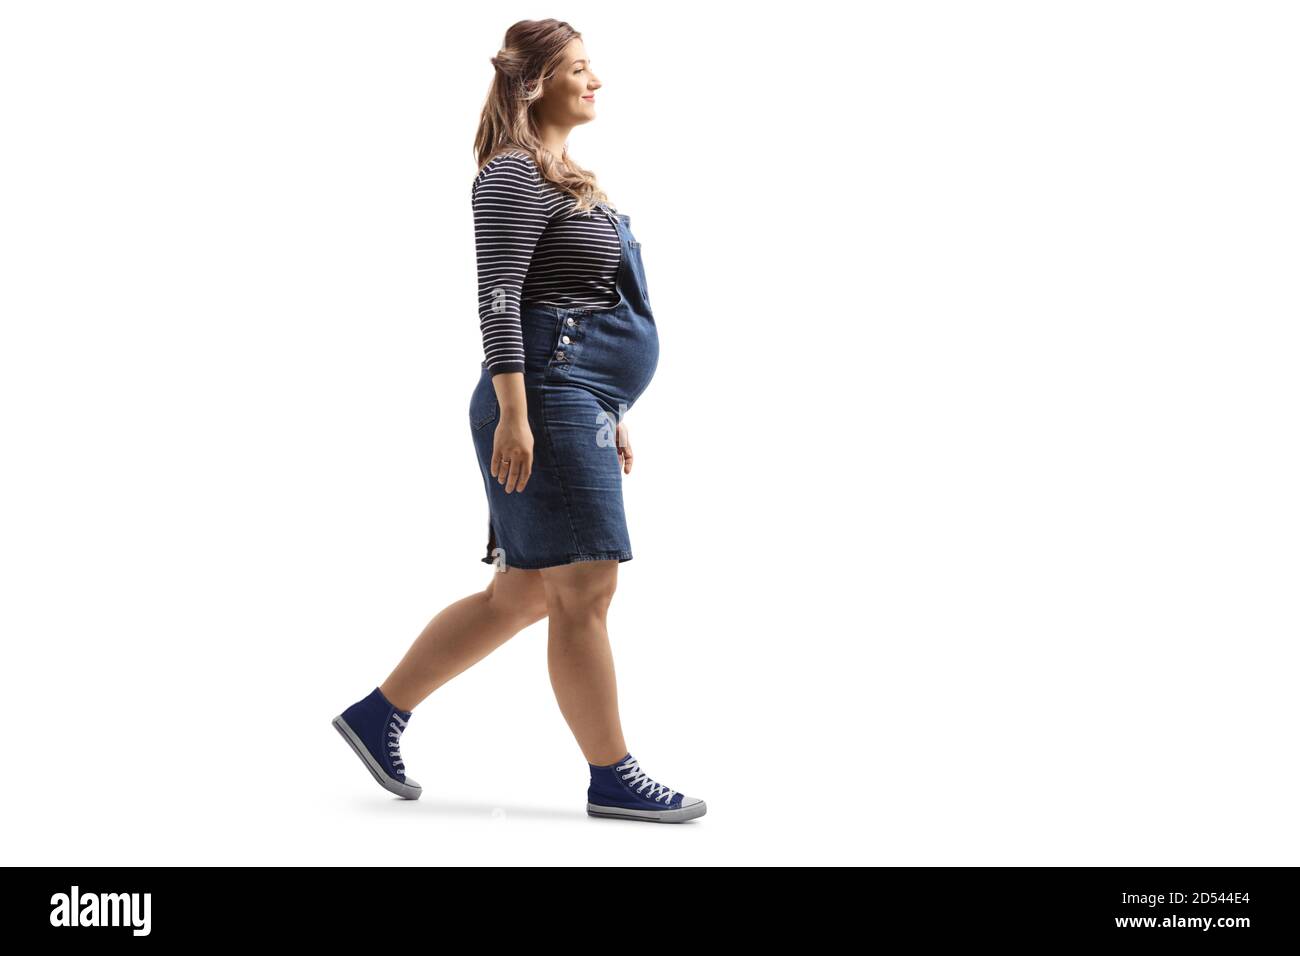 Full length shot of a pregnant woman walking isolated on white background Stock Photo